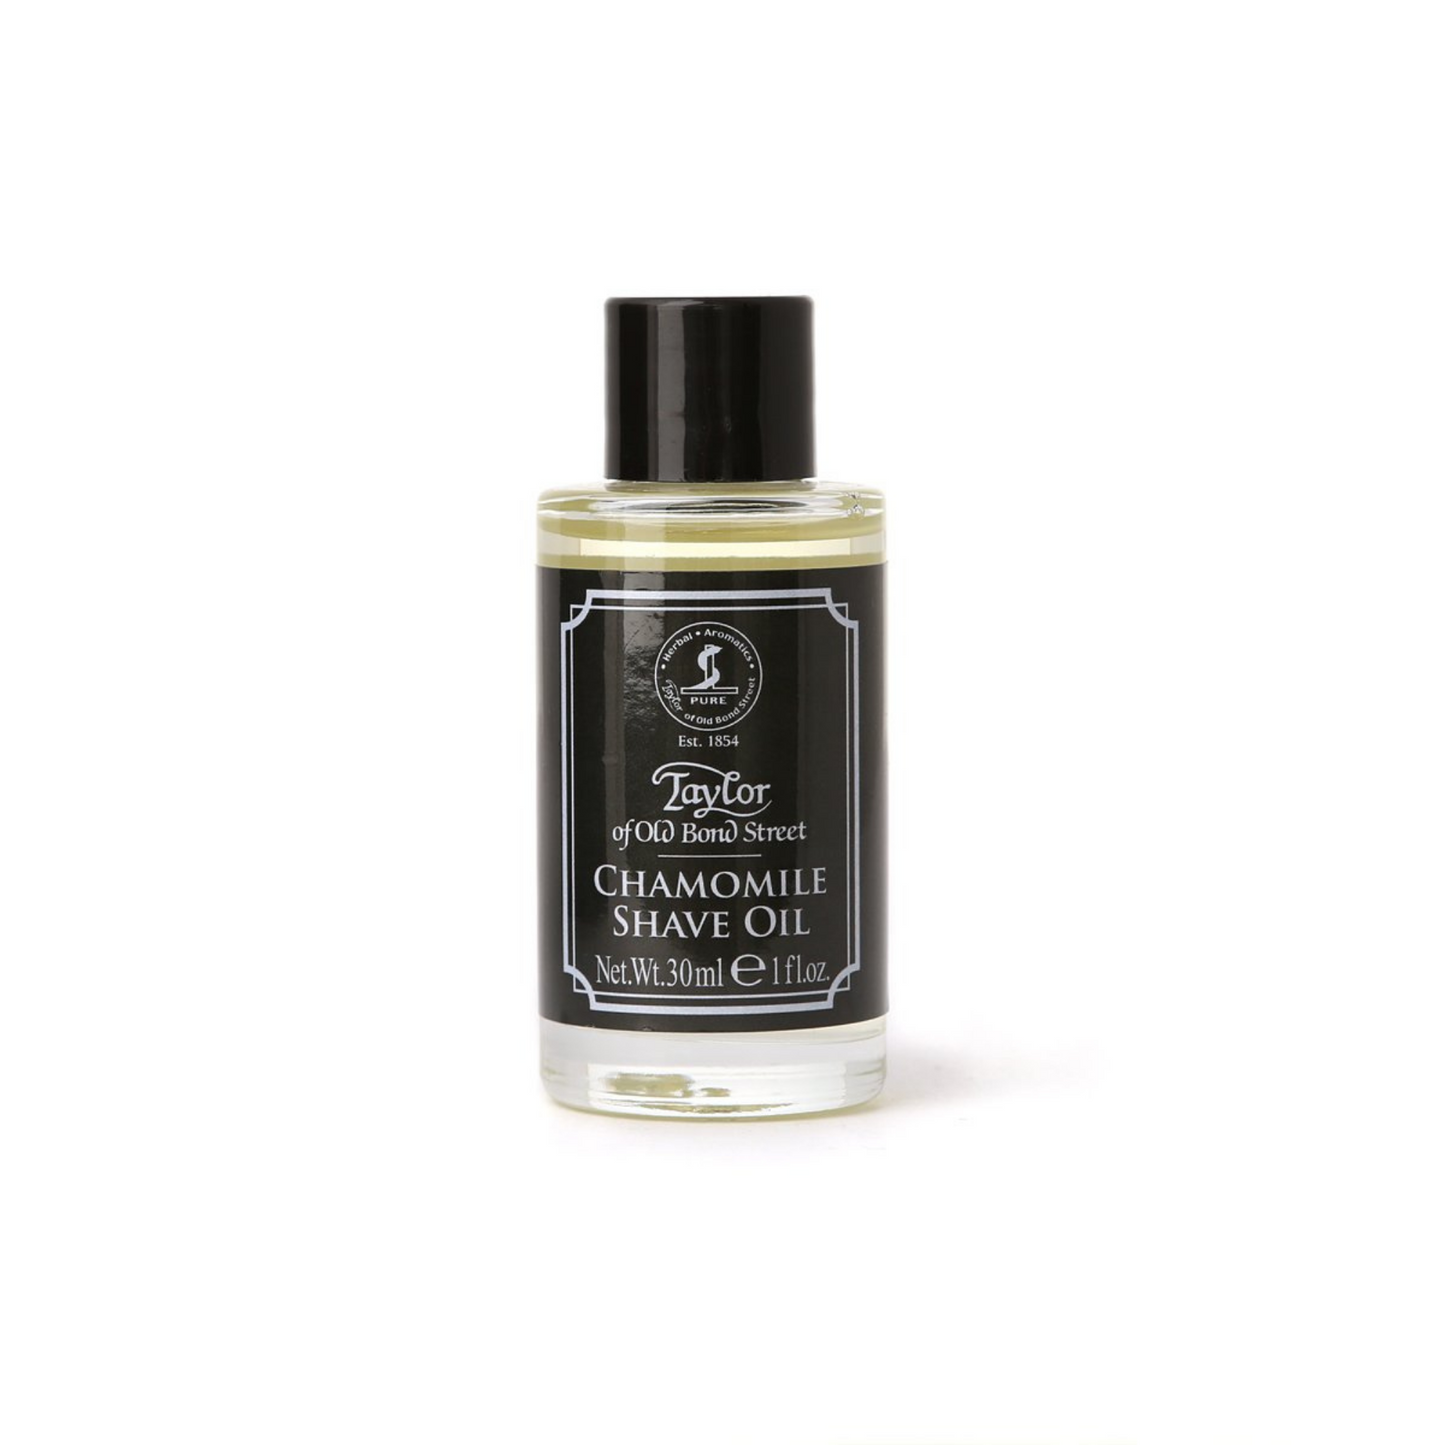 Primary Image of Chamomile Shave Oil